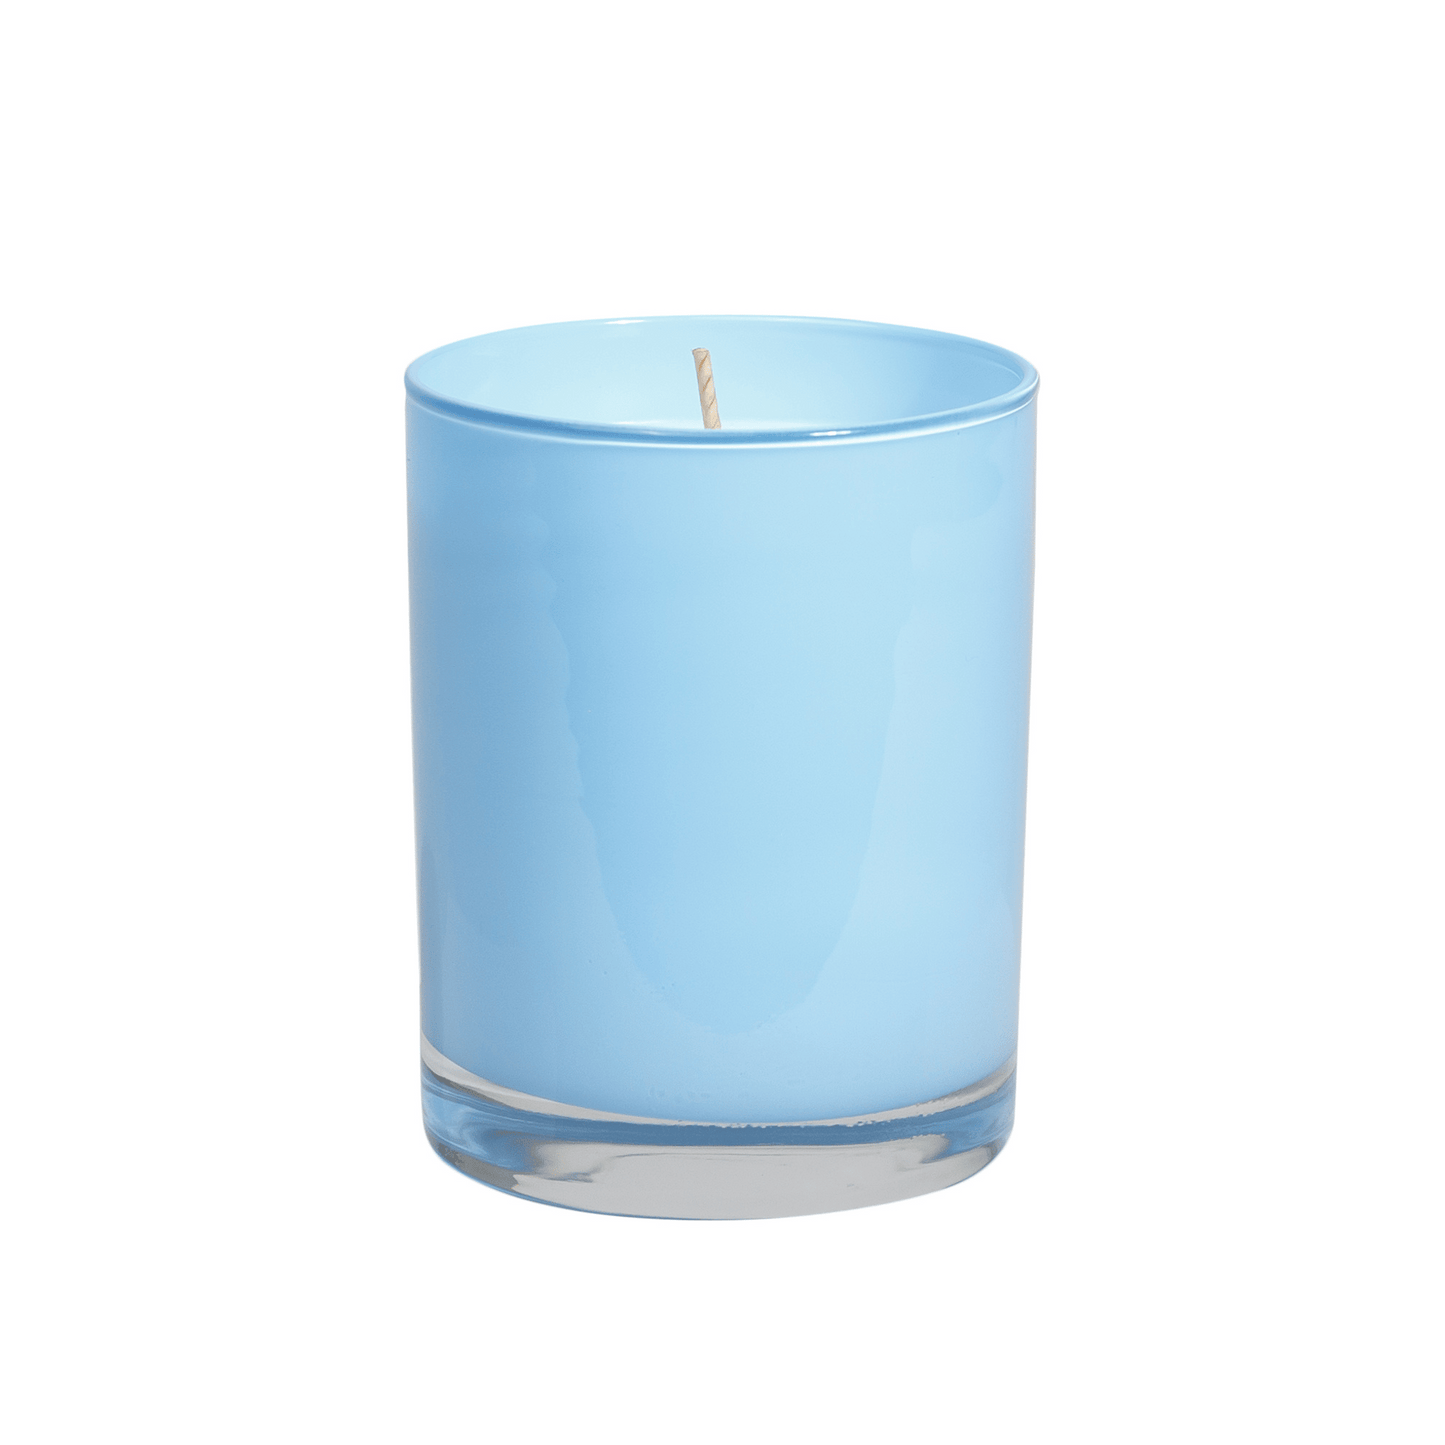 Alternate Image of Poolside Road Trip 11 oz. Pure Soy Candle